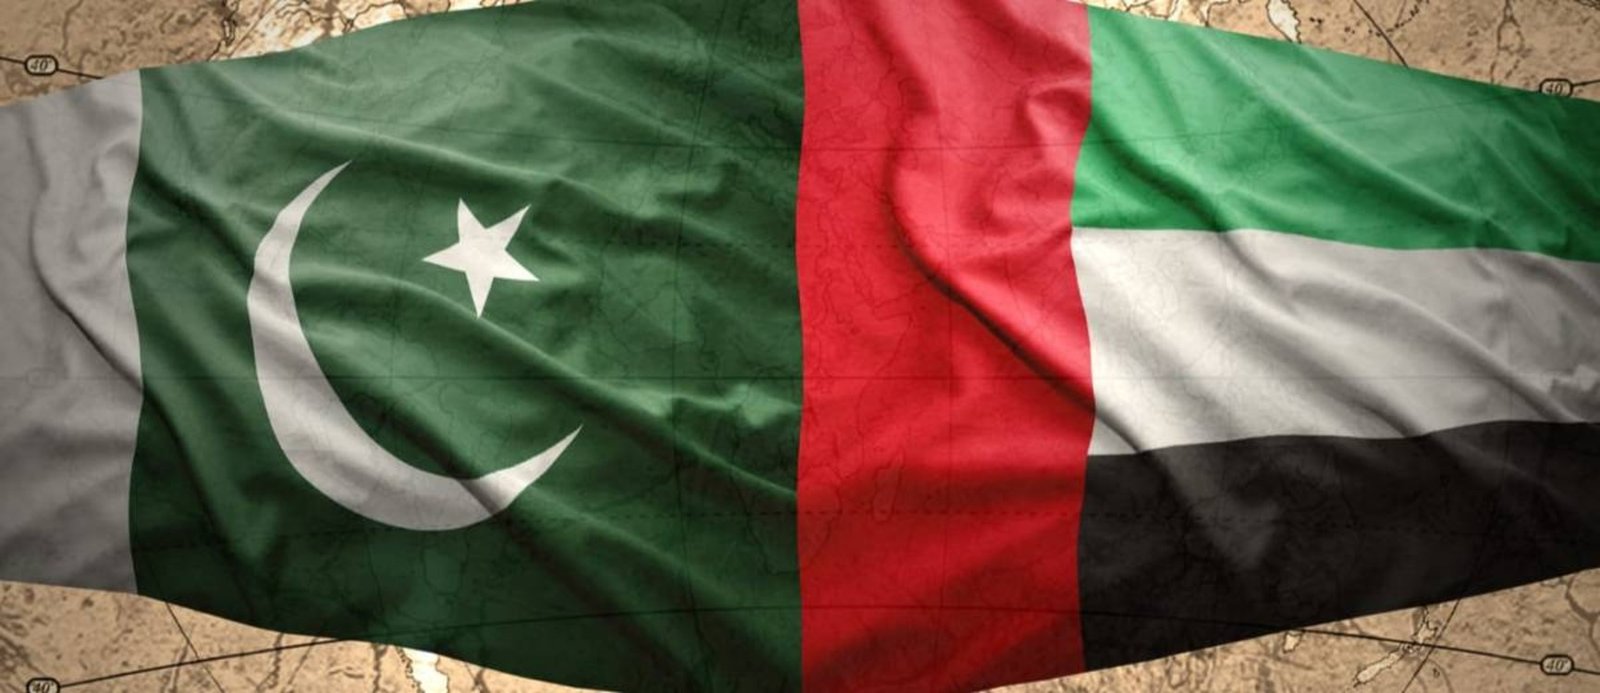 Pakistan and Dubai signed $3bn investment pact